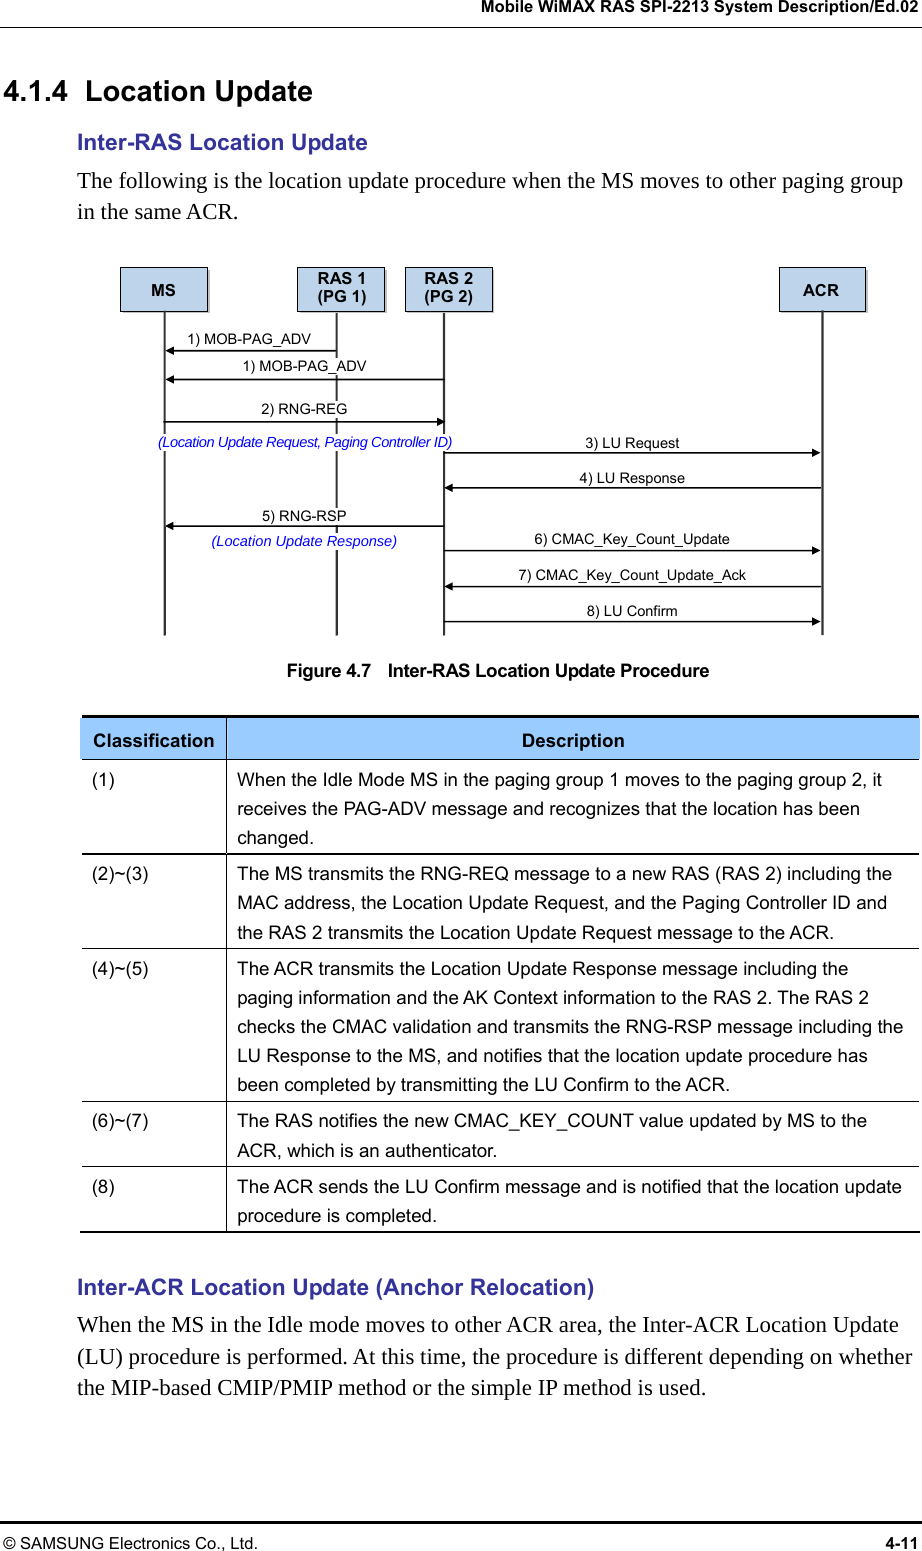   Mobile WiMAX RAS SPI-2213 System Description/Ed.02 © SAMSUNG Electronics Co., Ltd.  4-11 4.1.4 Location Update Inter-RAS Location Update The following is the location update procedure when the MS moves to other paging group in the same ACR.    Figure 4.7    Inter-RAS Location Update Procedure  Classification  Description (1)  When the Idle Mode MS in the paging group 1 moves to the paging group 2, it receives the PAG-ADV message and recognizes that the location has been changed. (2)~(3)  The MS transmits the RNG-REQ message to a new RAS (RAS 2) including the MAC address, the Location Update Request, and the Paging Controller ID and the RAS 2 transmits the Location Update Request message to the ACR. (4)~(5)  The ACR transmits the Location Update Response message including the paging information and the AK Context information to the RAS 2. The RAS 2 checks the CMAC validation and transmits the RNG-RSP message including the LU Response to the MS, and notifies that the location update procedure has been completed by transmitting the LU Confirm to the ACR. (6)~(7)  The RAS notifies the new CMAC_KEY_COUNT value updated by MS to the ACR, which is an authenticator. (8)  The ACR sends the LU Confirm message and is notified that the location update procedure is completed.  Inter-ACR Location Update (Anchor Relocation) When the MS in the Idle mode moves to other ACR area, the Inter-ACR Location Update (LU) procedure is performed. At this time, the procedure is different depending on whether the MIP-based CMIP/PMIP method or the simple IP method is used. MS RAS 1(PG 1) ACR 1) MOB-PAG_ADV 5) RNG-RSP (Location Update Response)RAS 2(PG 2)1) MOB-PAG_ADV 2) RNG-REG (Location Update Request, Paging Controller ID) 3) LU Request 4) LU Response 6) CMAC_Key_Count_Update 7) CMAC_Key_Count_Update_Ack 8) LU Confirm 